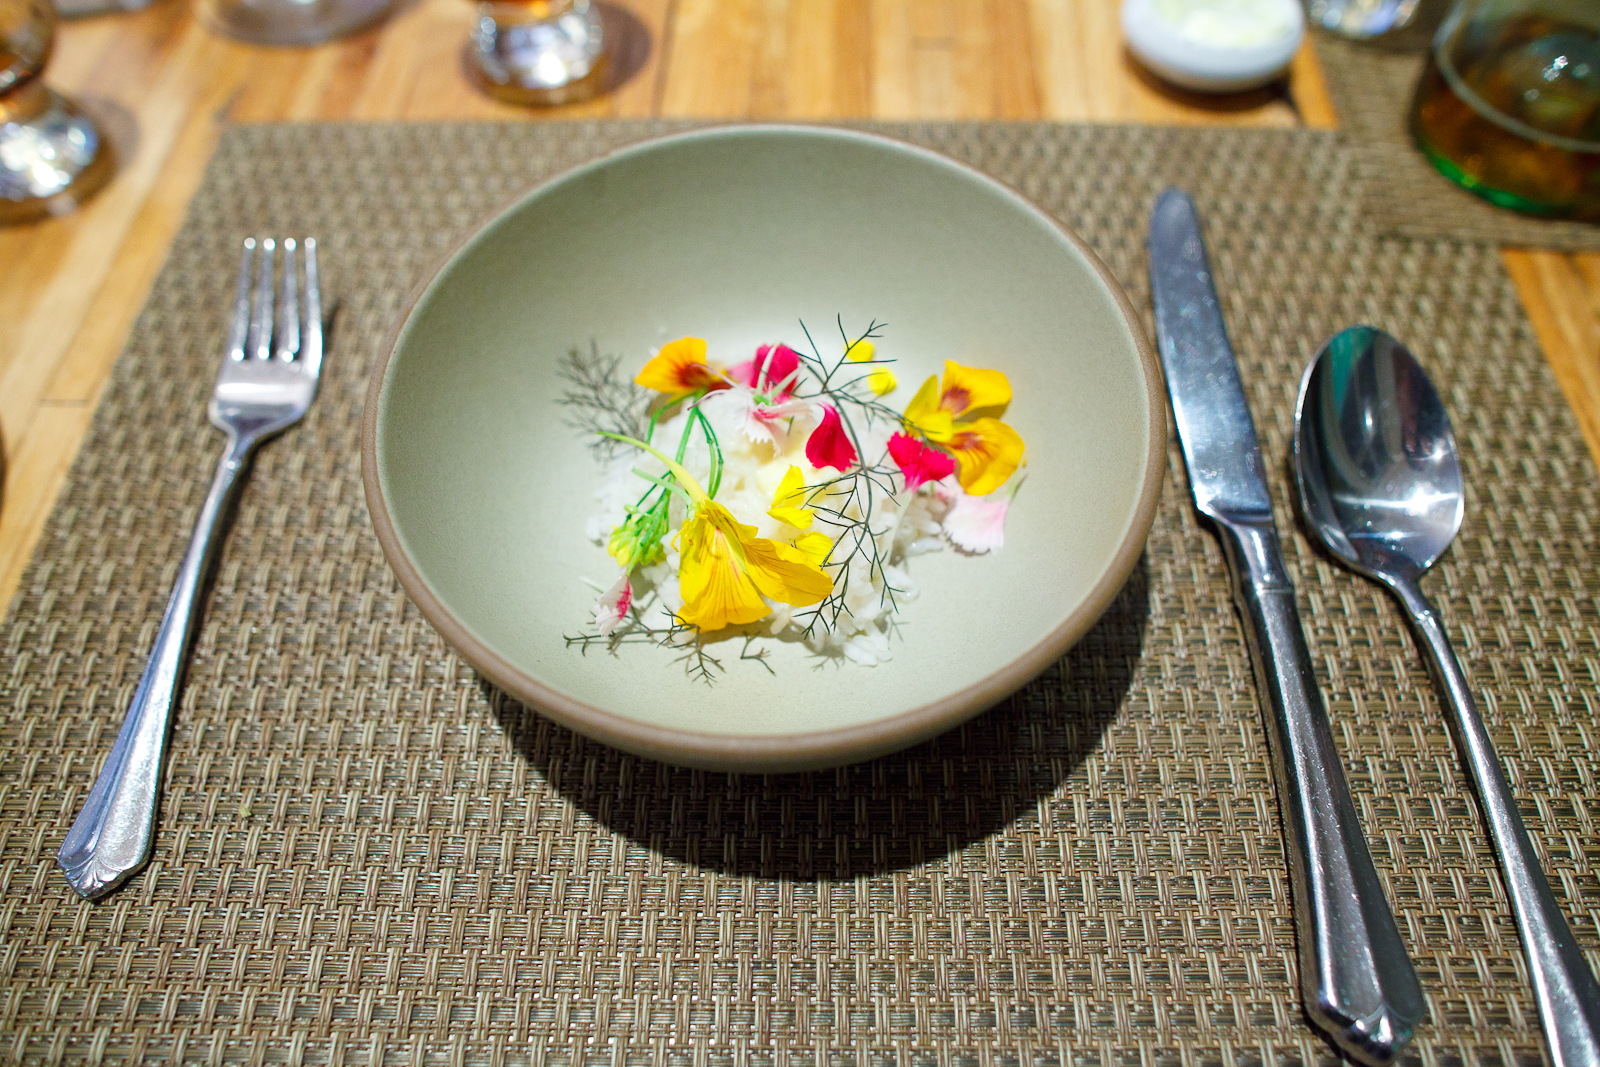 9th Course: Local rice with flowers